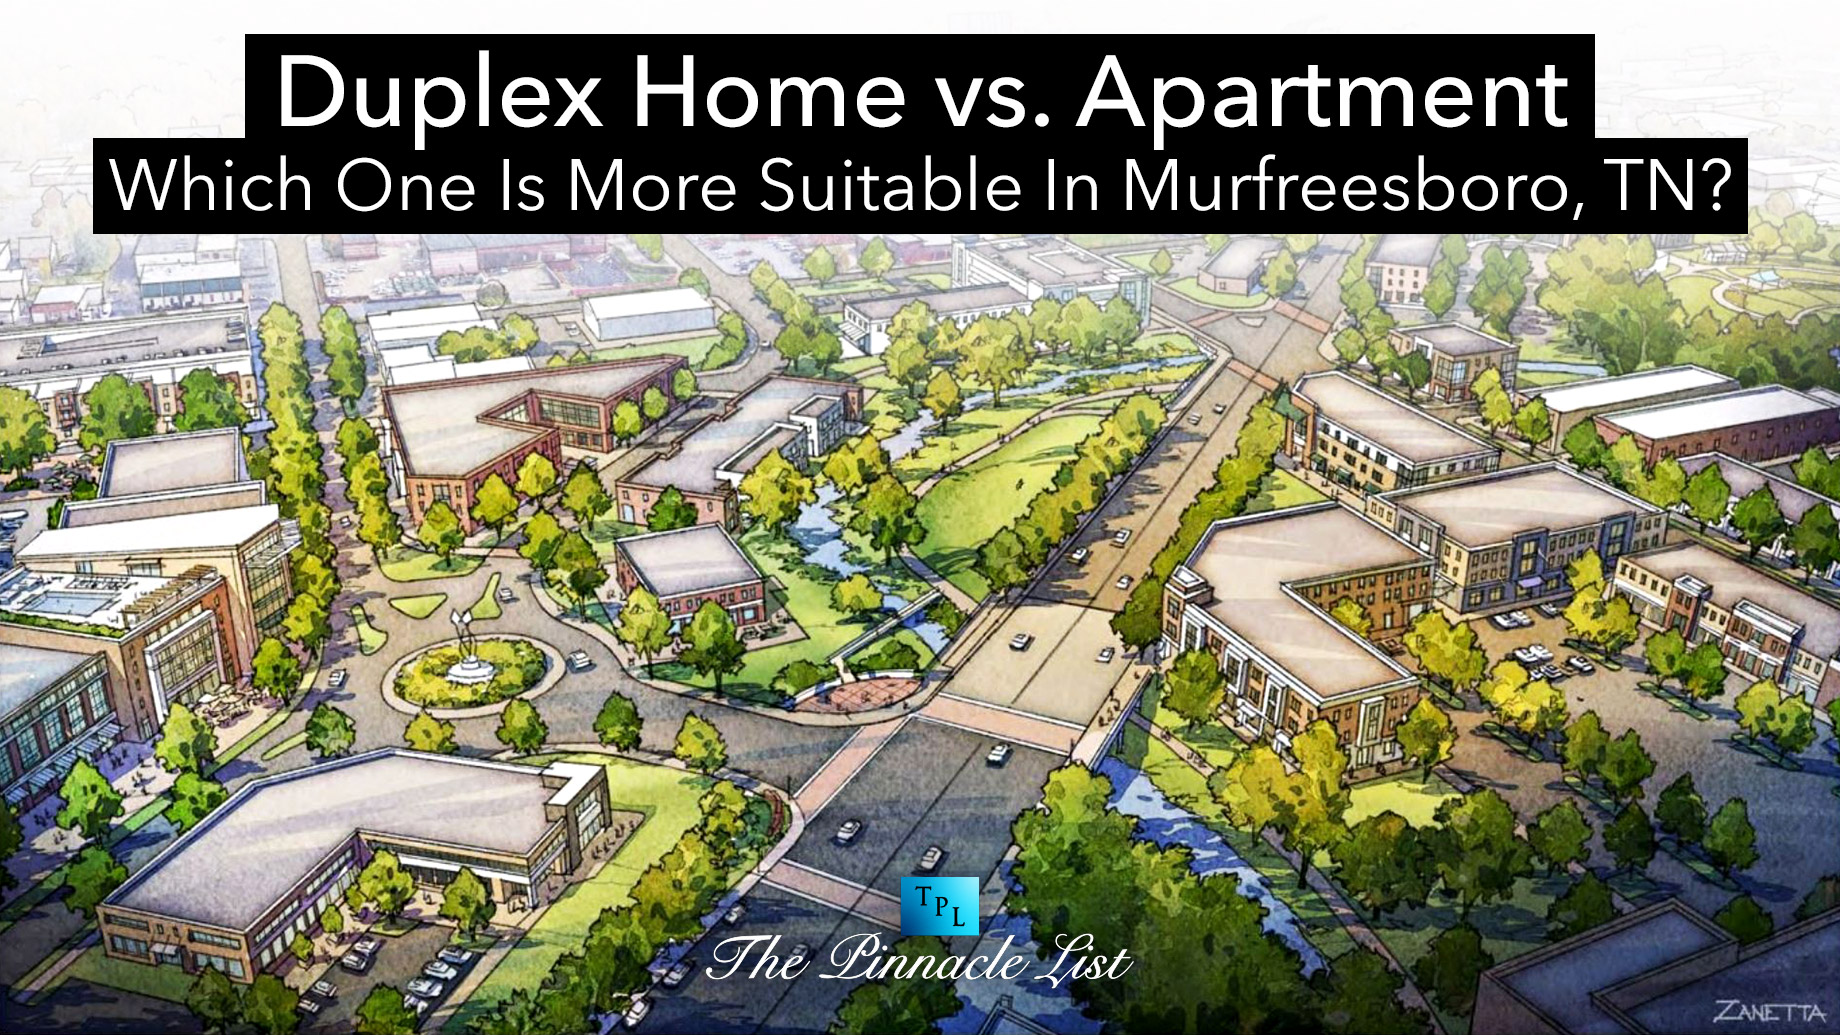 Duplex Home Or Apartment - Which One Is More Suitable In Murfreesboro, TN?